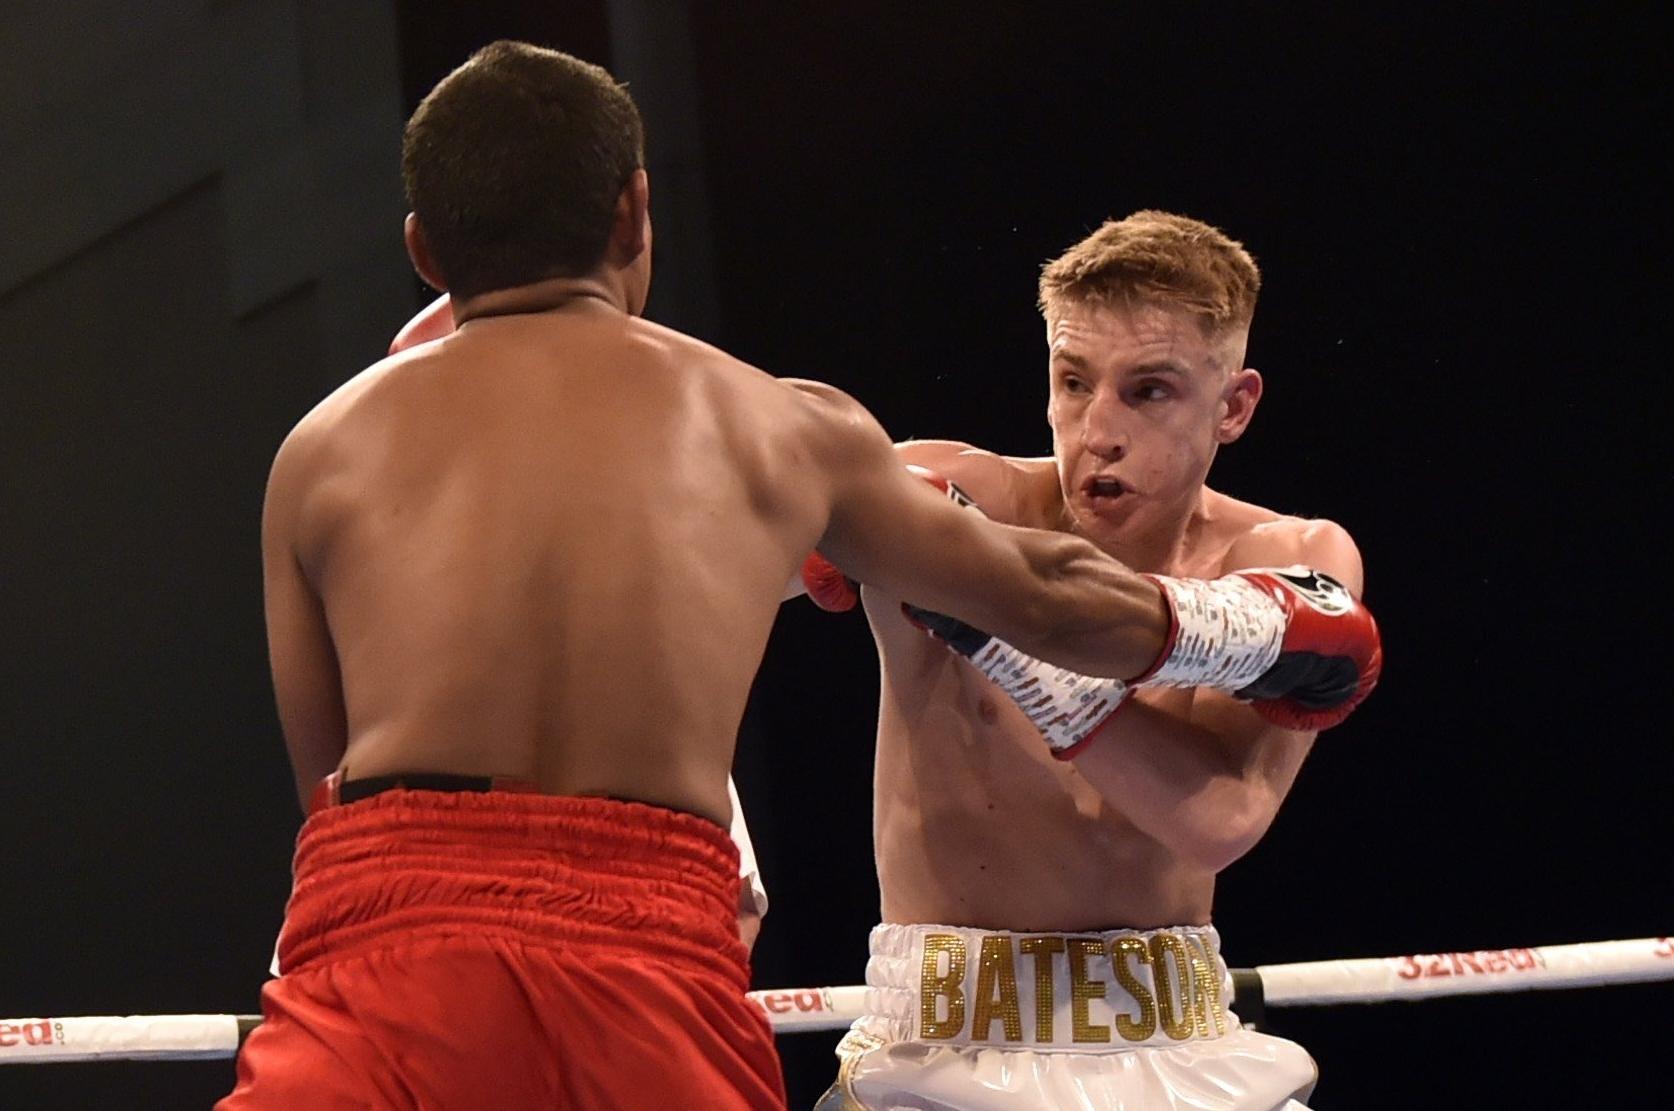 Boxing Jack Bateson in fight to land shot at big time